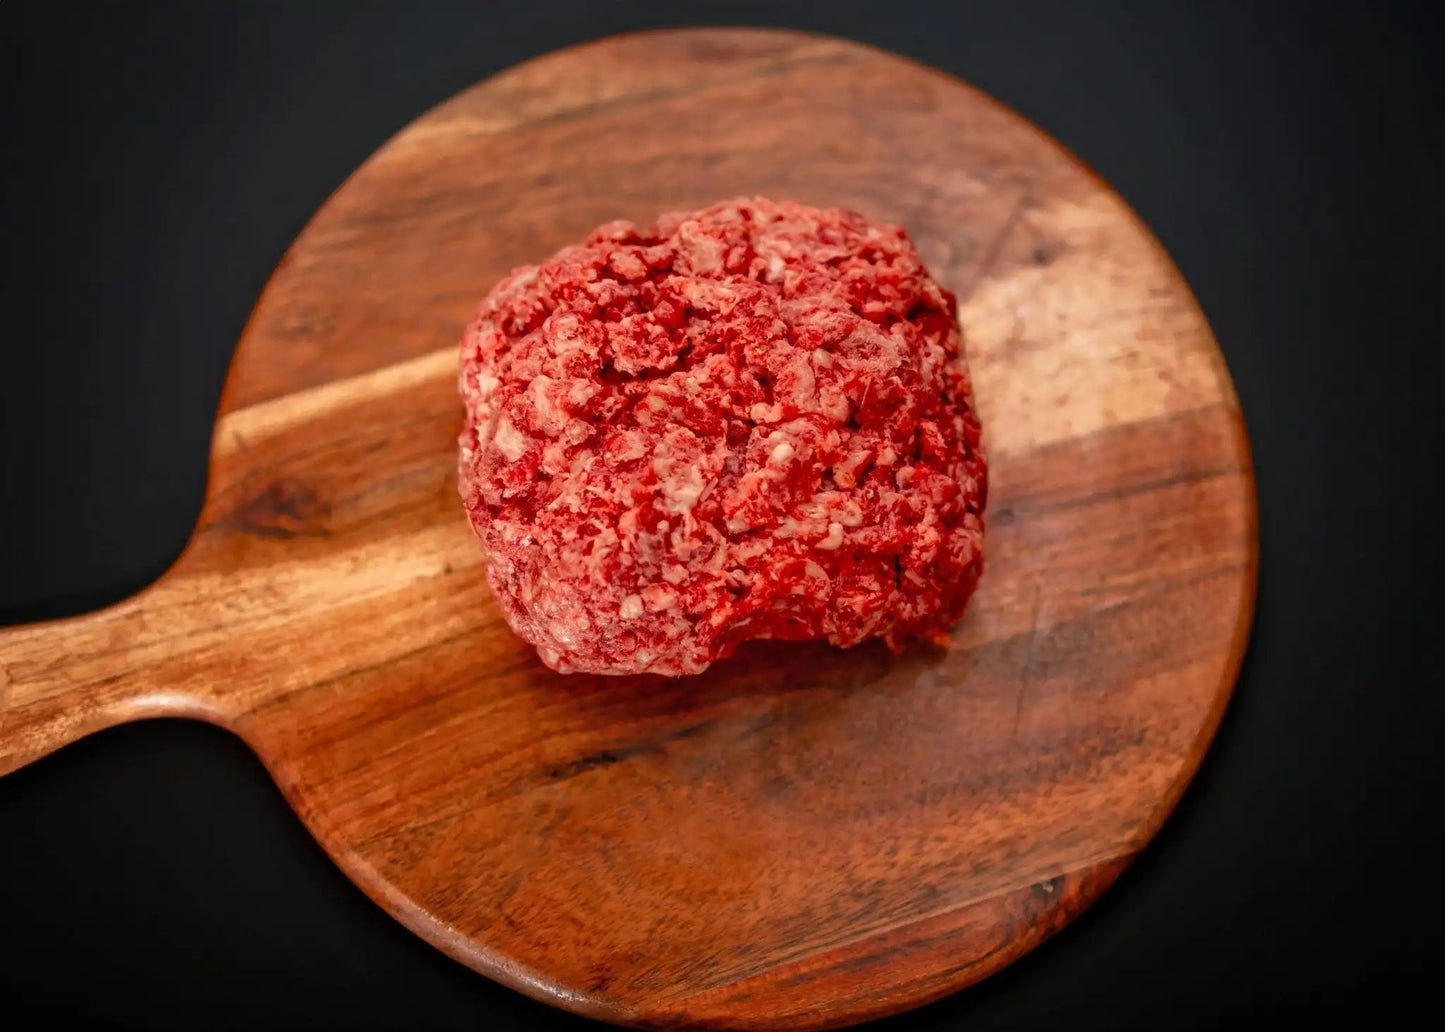 100% All-Natural Grass-Fed Pasture-Raised Wagyu Ground Beef - The Hufeisen-Ranch (WYO Wagyu)